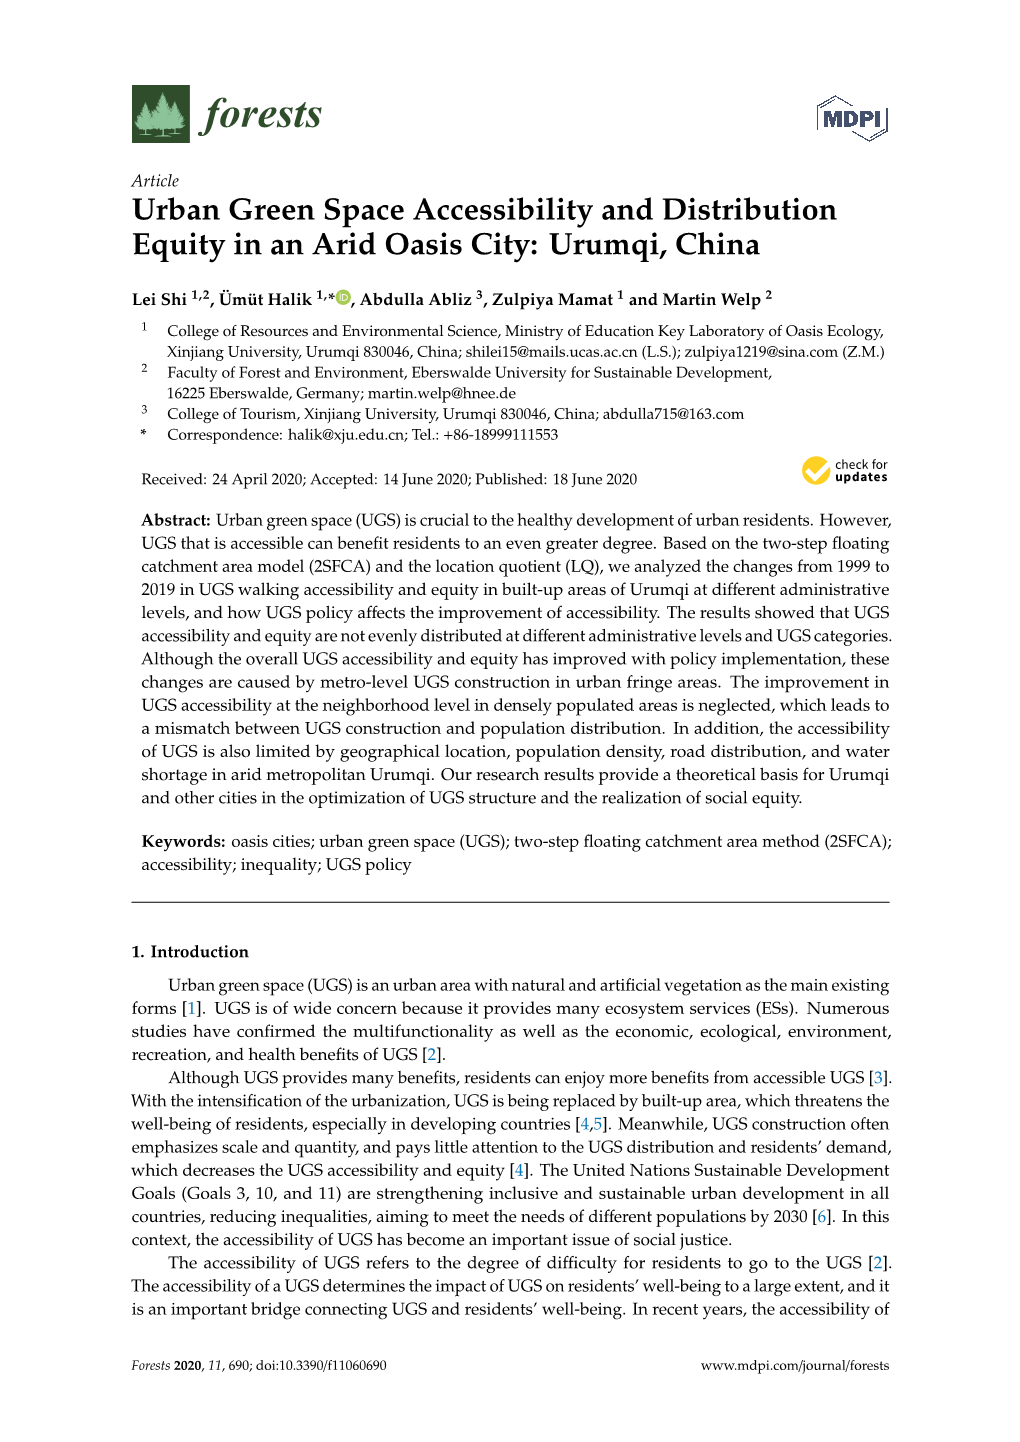 Urban Green Space Accessibility and Distribution Equity in an Arid Oasis City: Urumqi, China